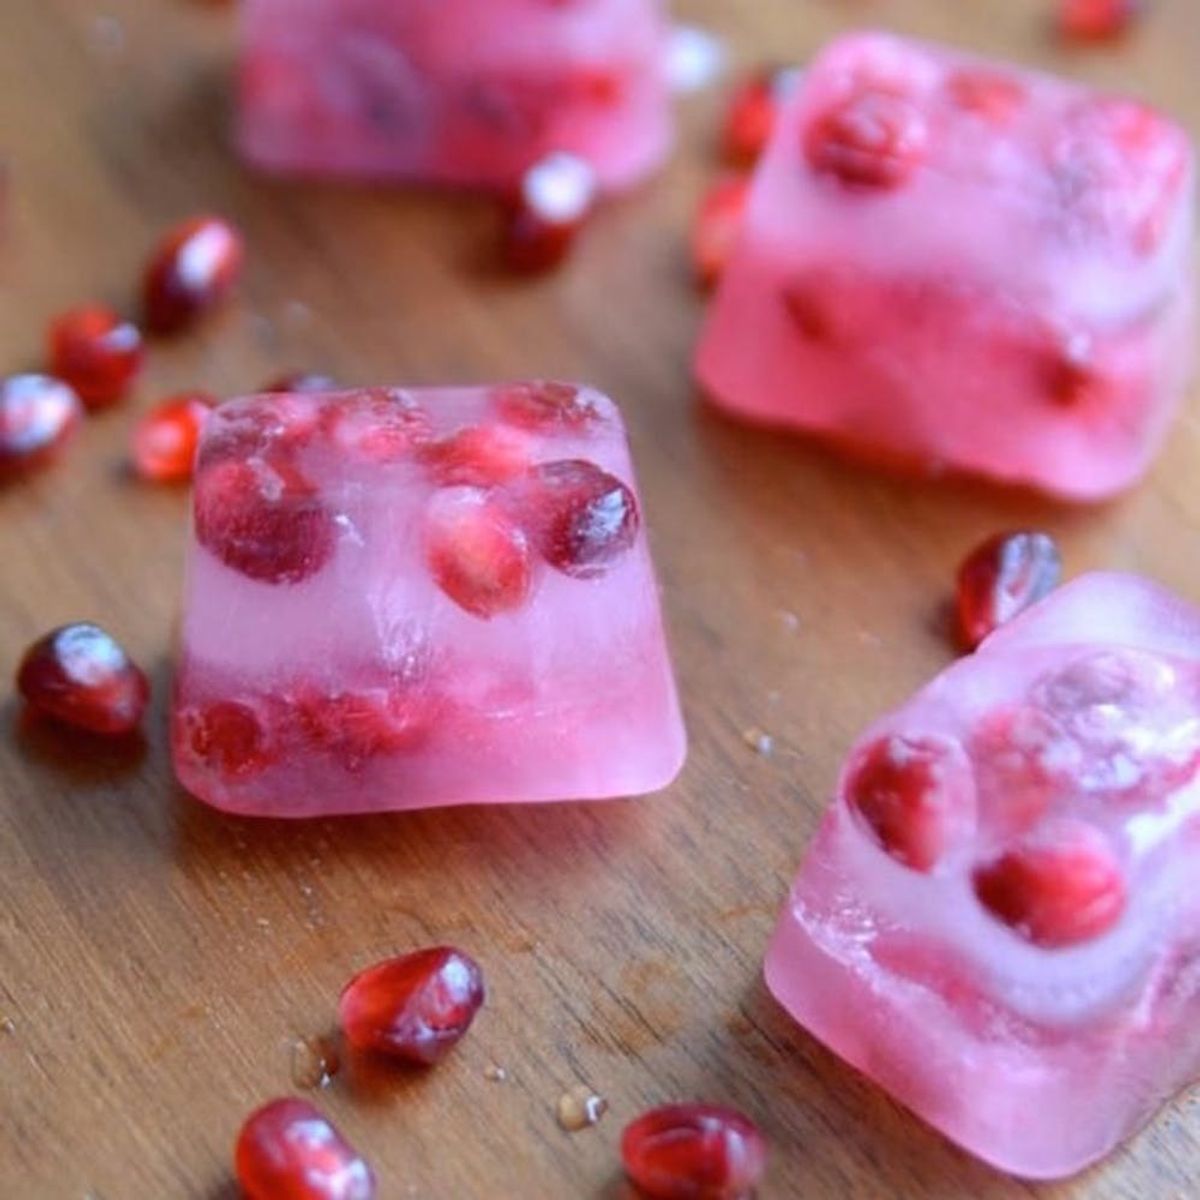 12 Ways to Make Flavored Ice Cubes